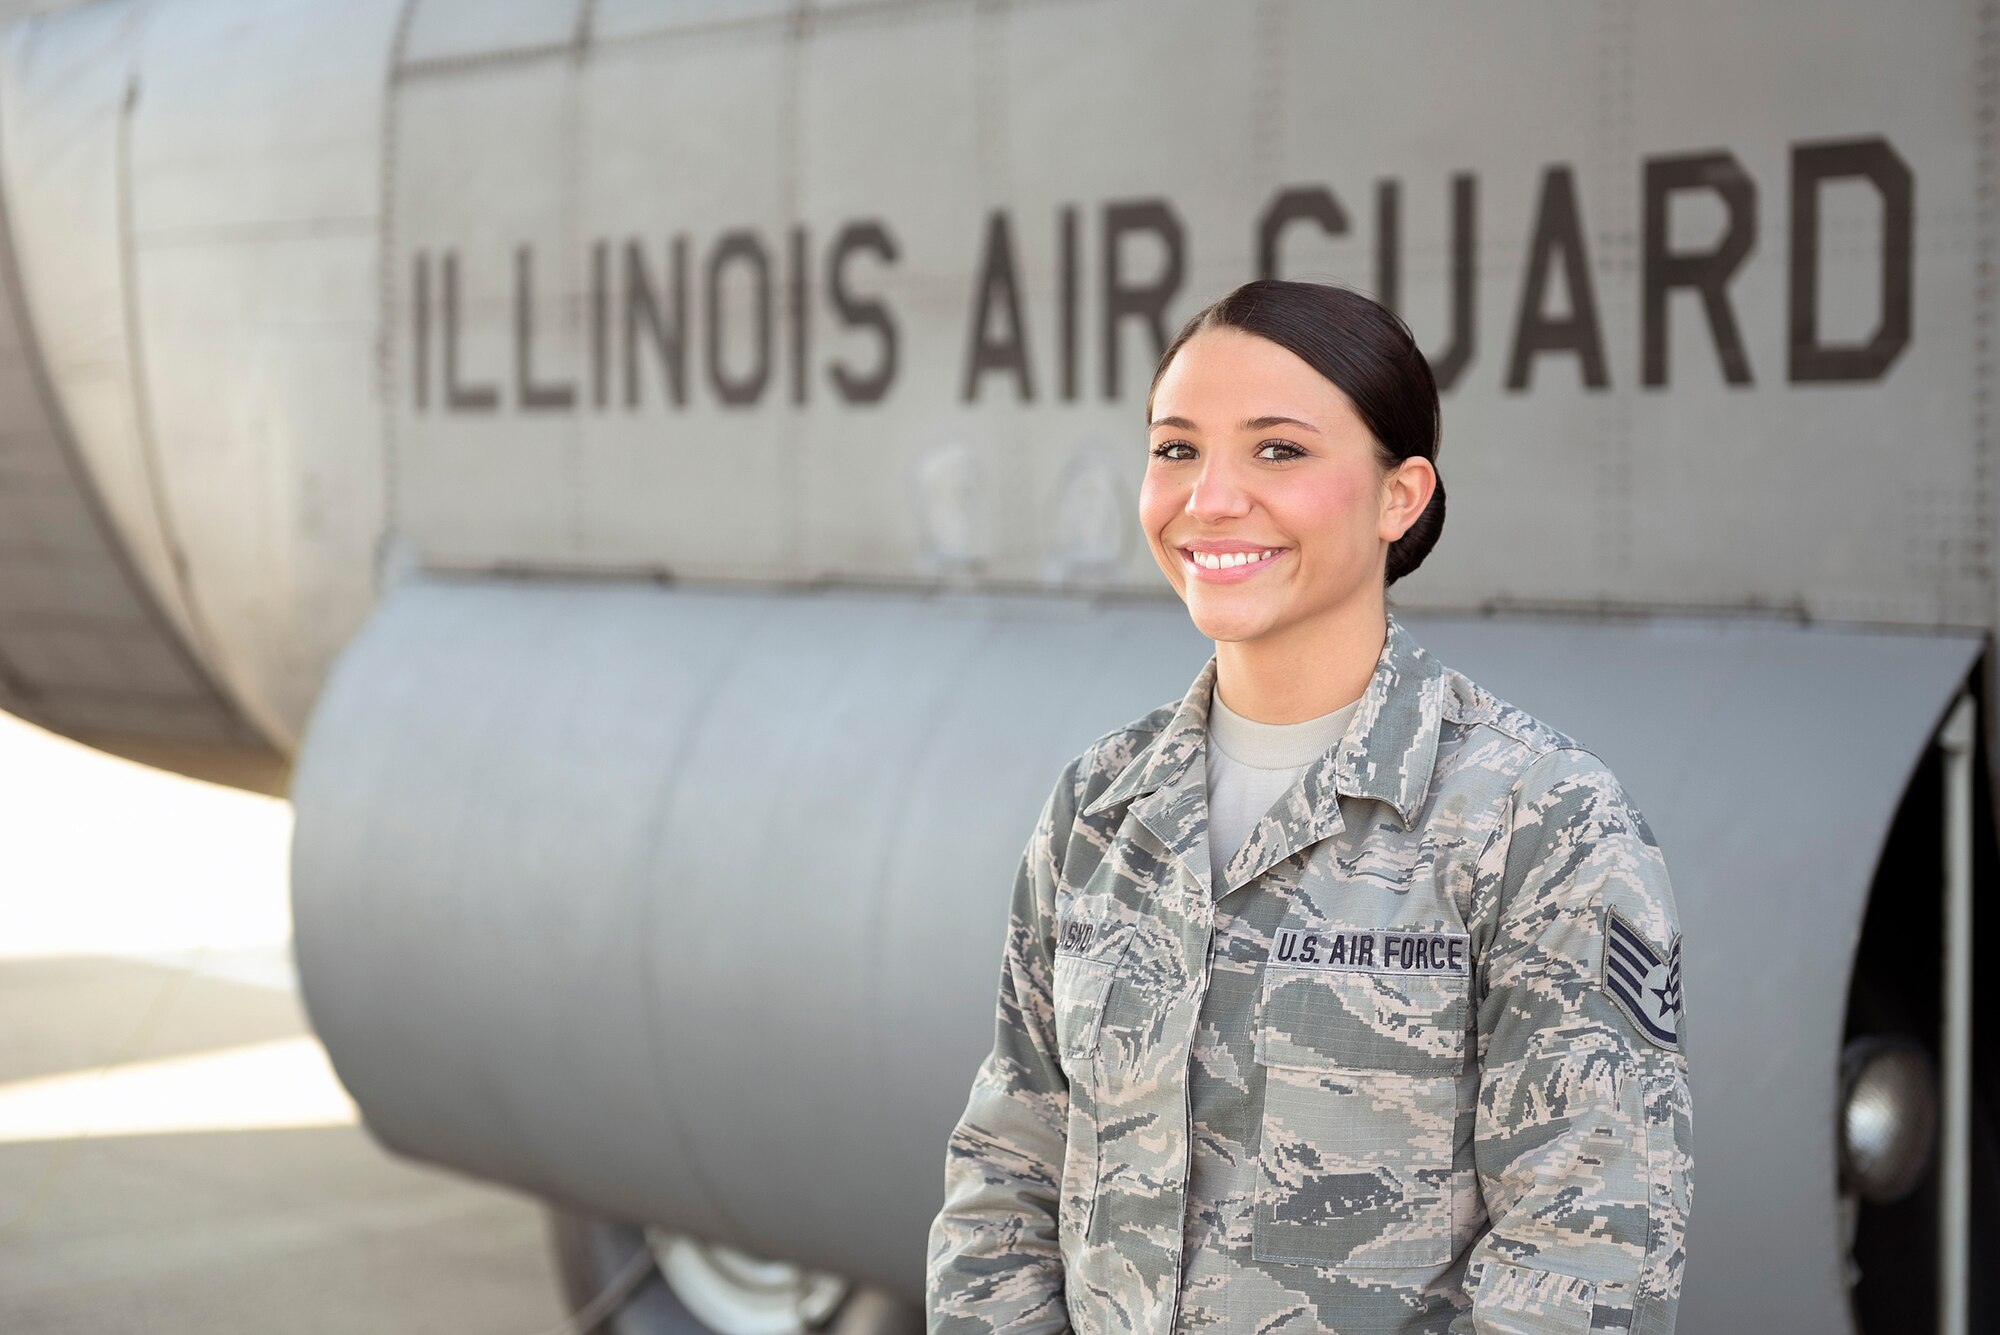 U.S. Air Force Staff Sgt. Rachael L. Blasko, an enlisted accessions recruiter with the 182nd Force Support Squadron, Illinois Air National Guard, stands with one of her unit’s C-130 Hercules aircraft at the 182nd Airlift Wing, Peoria, Ill., May 24, 2016. Blasko is the installation’s newest recruiter and has been serving in the role for two years. (U.S. Air National Guard photo by Staff Sgt. Lealan Buehrer)